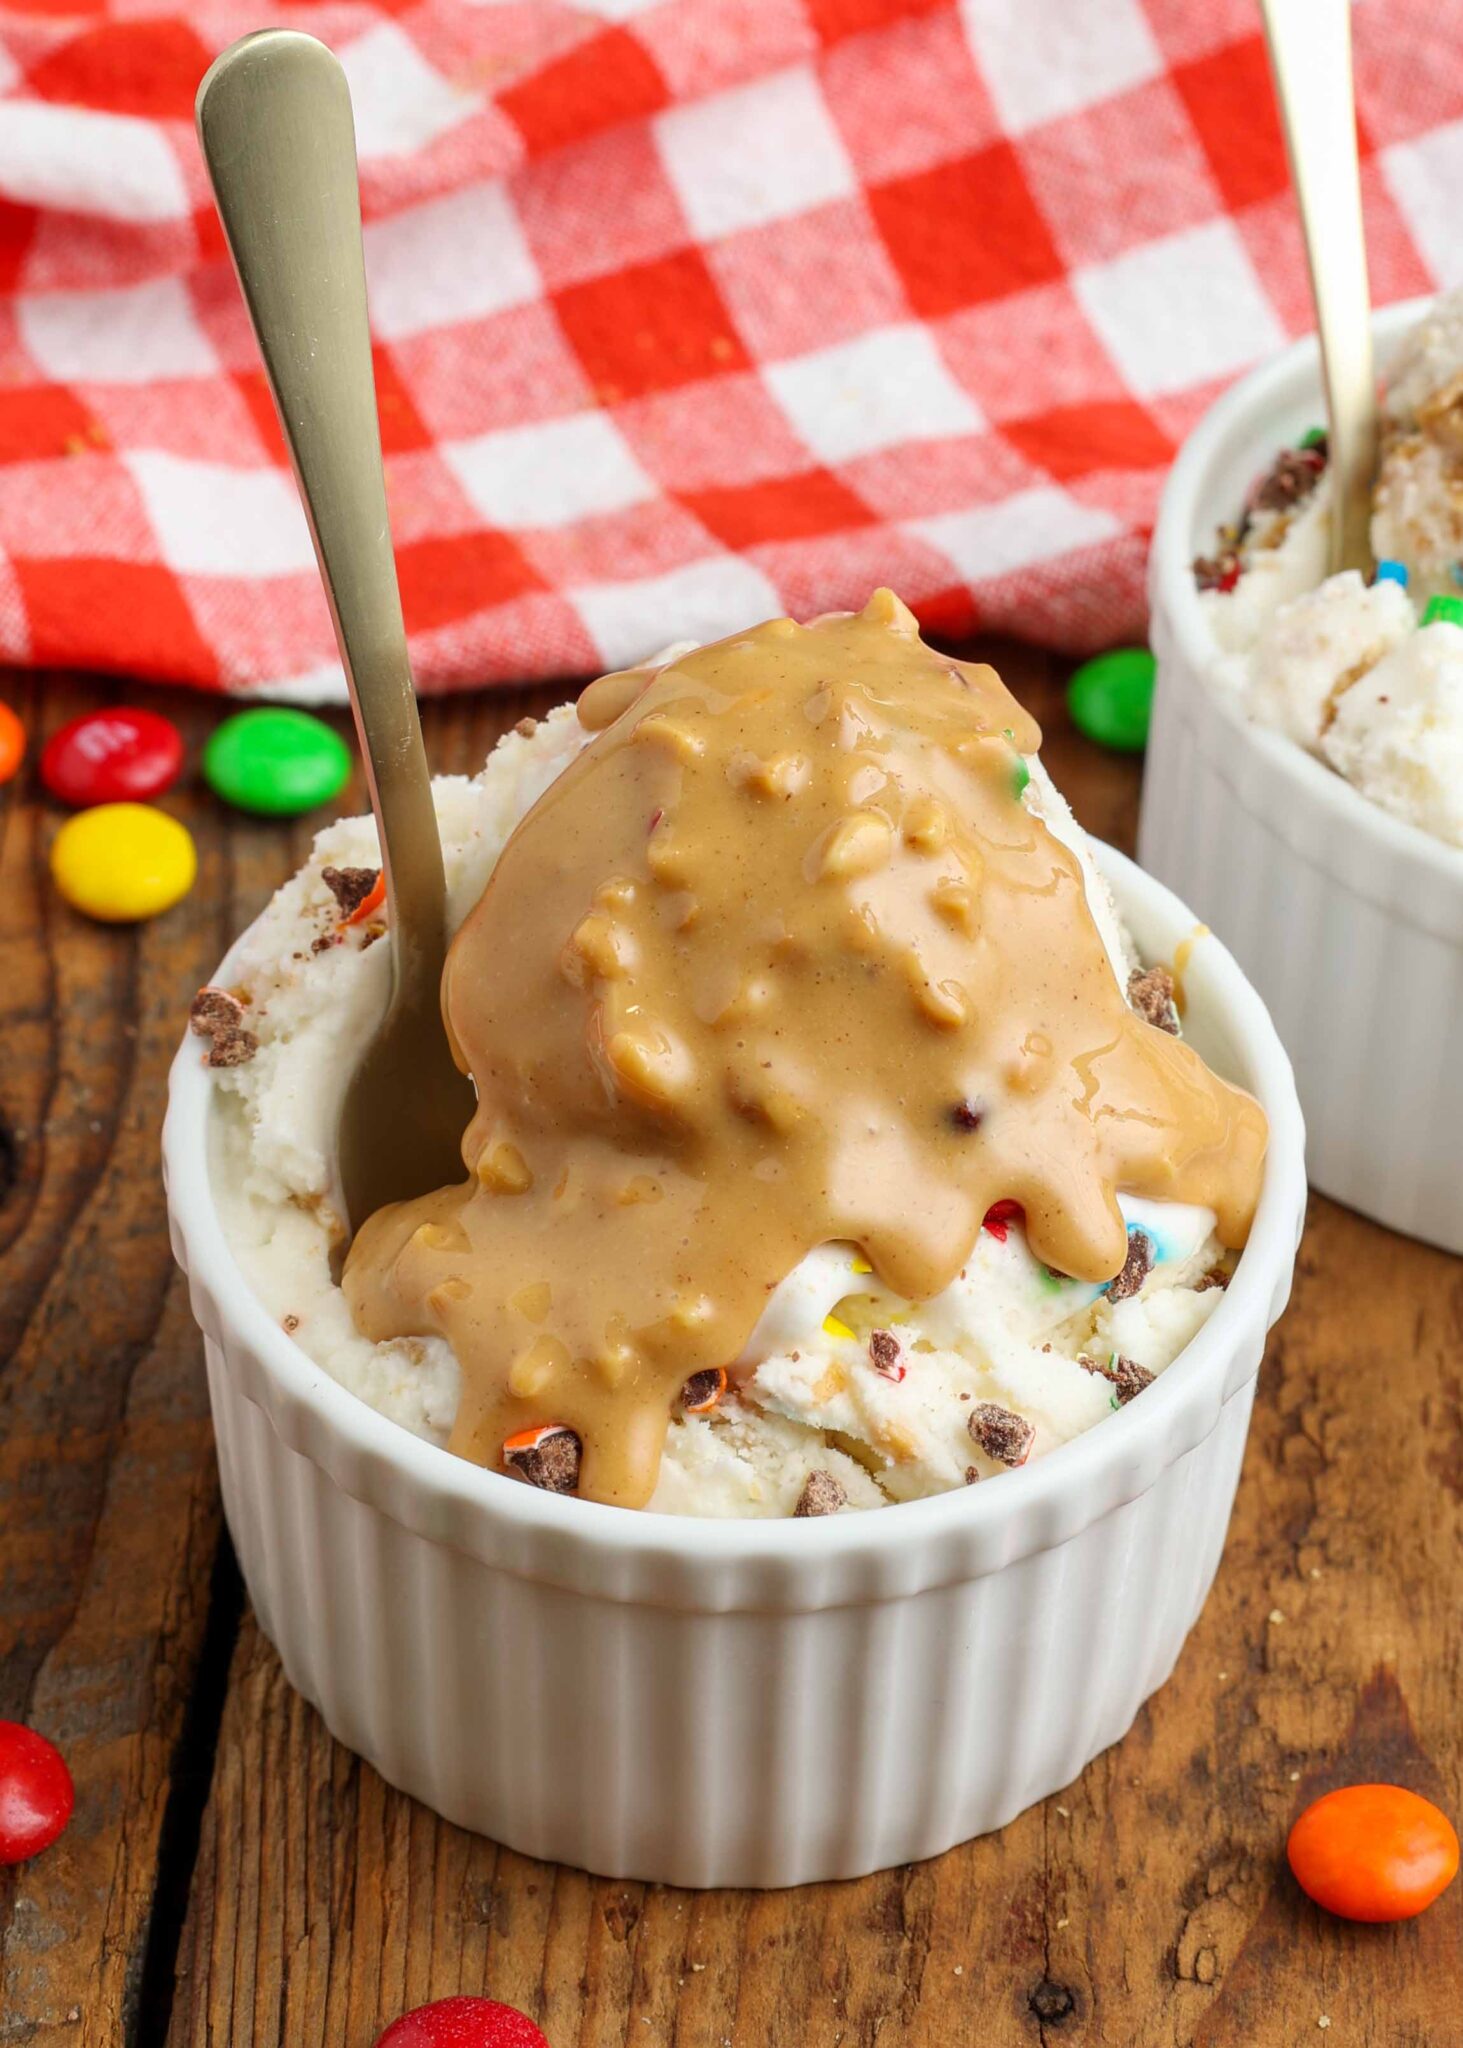 ice cream covered in peanut butter sauce